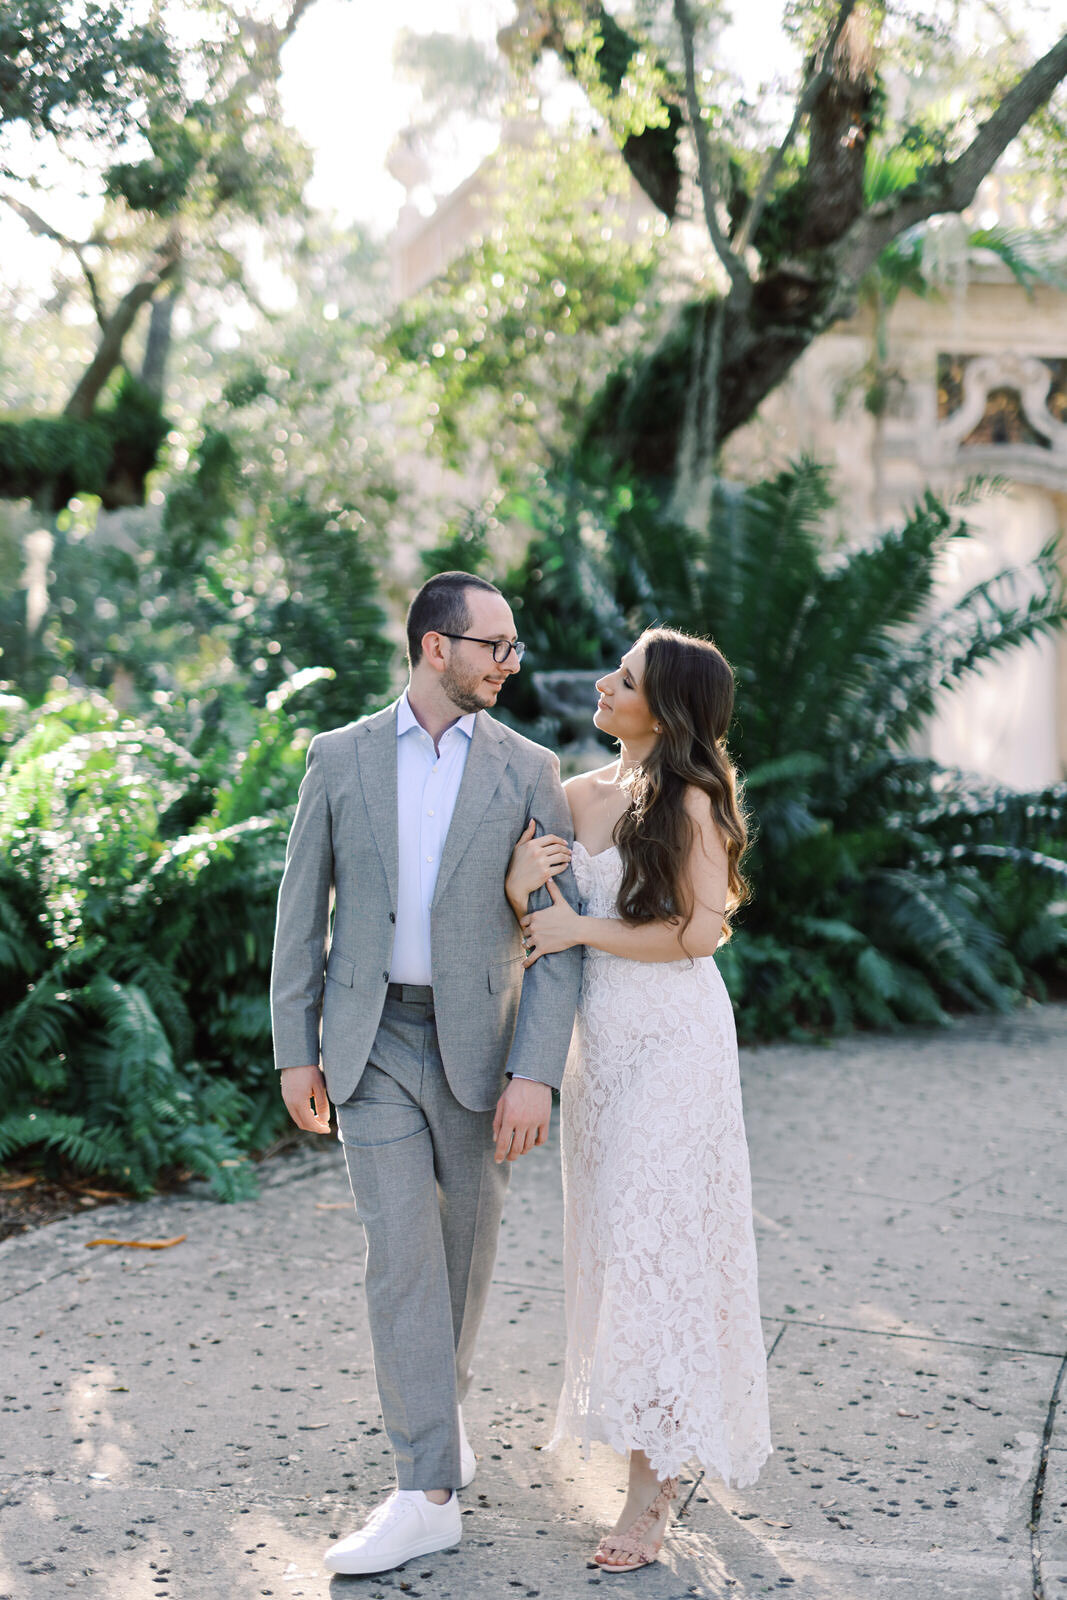 A Stylish and Chic Engagement Session at Vizcaya Museum in Miami Florida 14